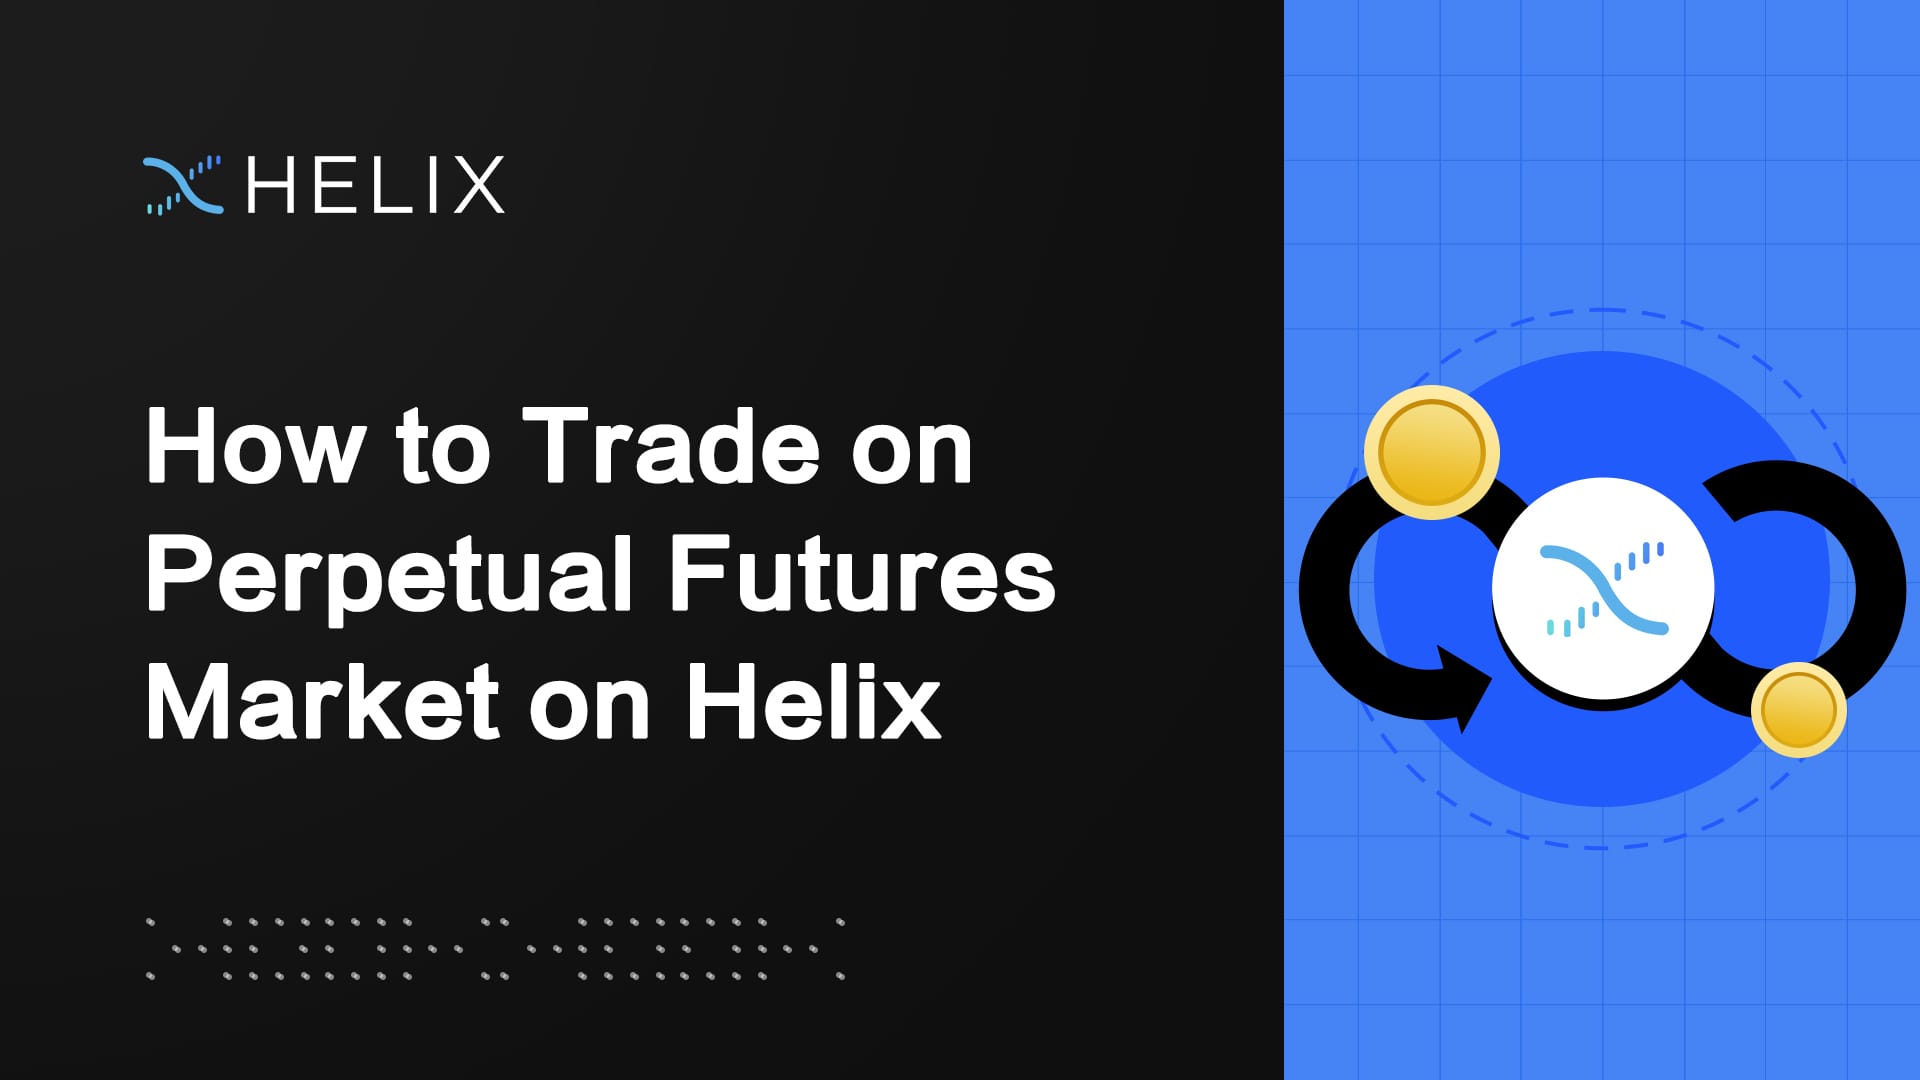 How to Trade On Helix’s Perpetual Futures Market